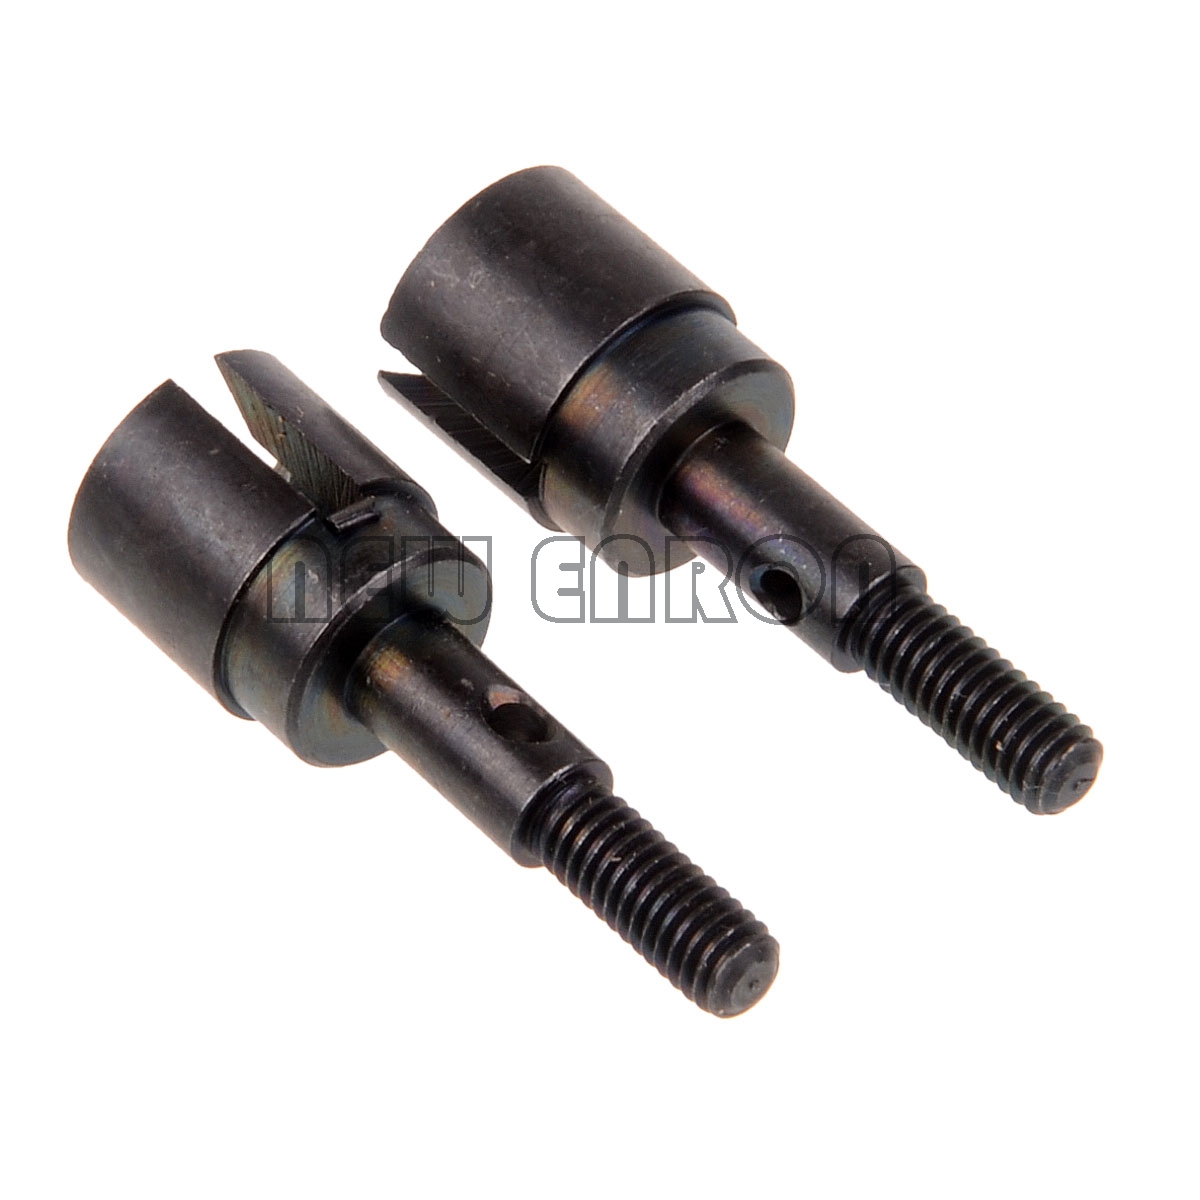 RC 02033 Metal Wheel Axle 2Pcs Fit HSP 1:10 On-Road Car Off-Road Buggy Truck